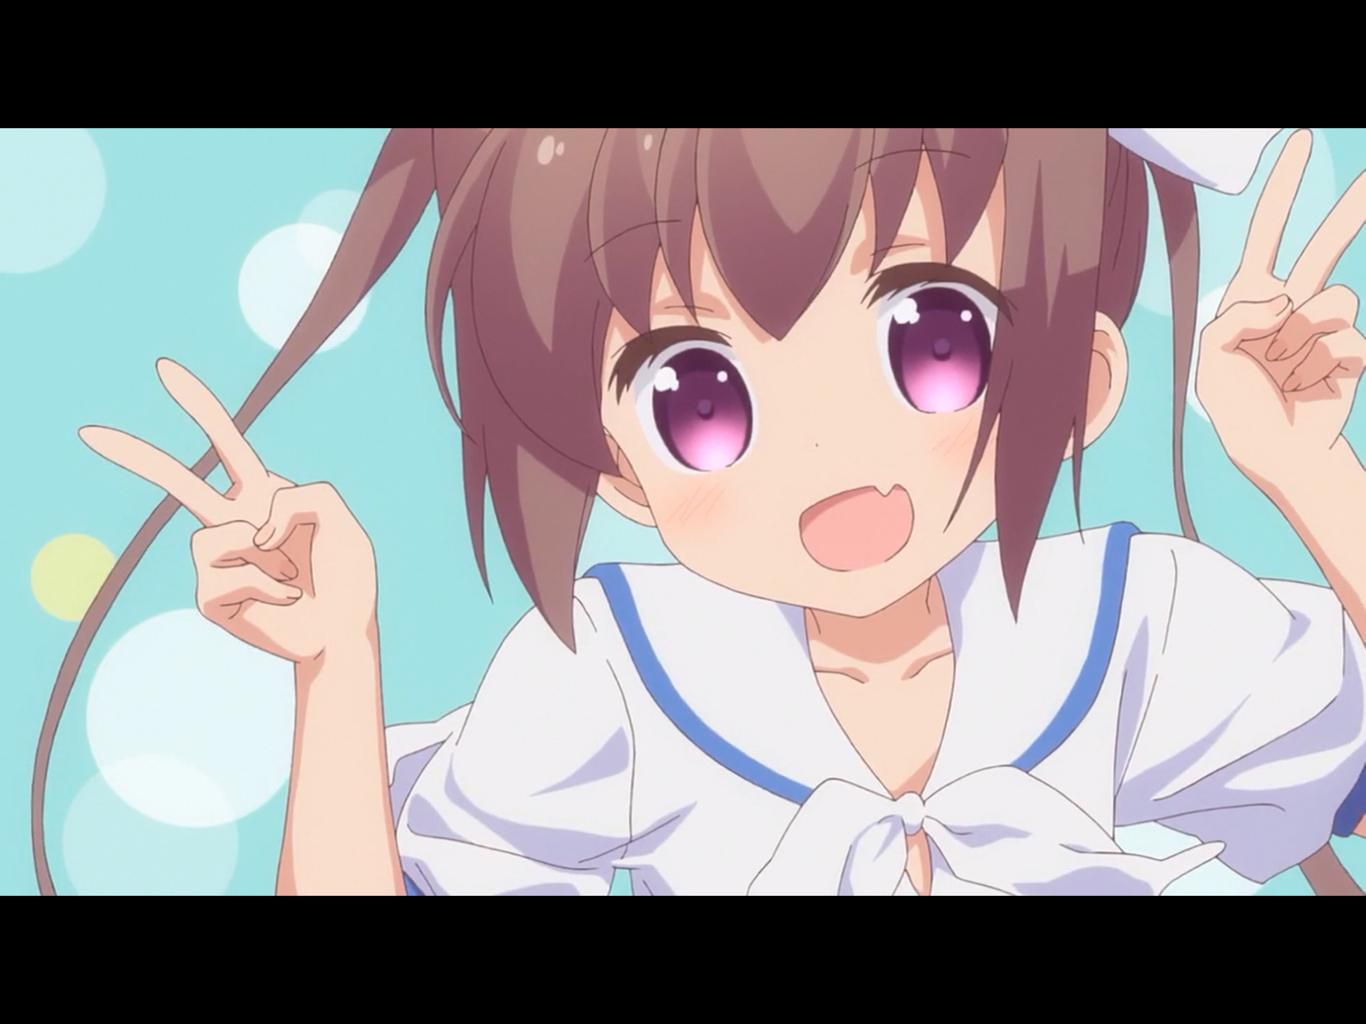 [There is an image] in Kirara anime speaking of cute girl character wwwwwwww 30